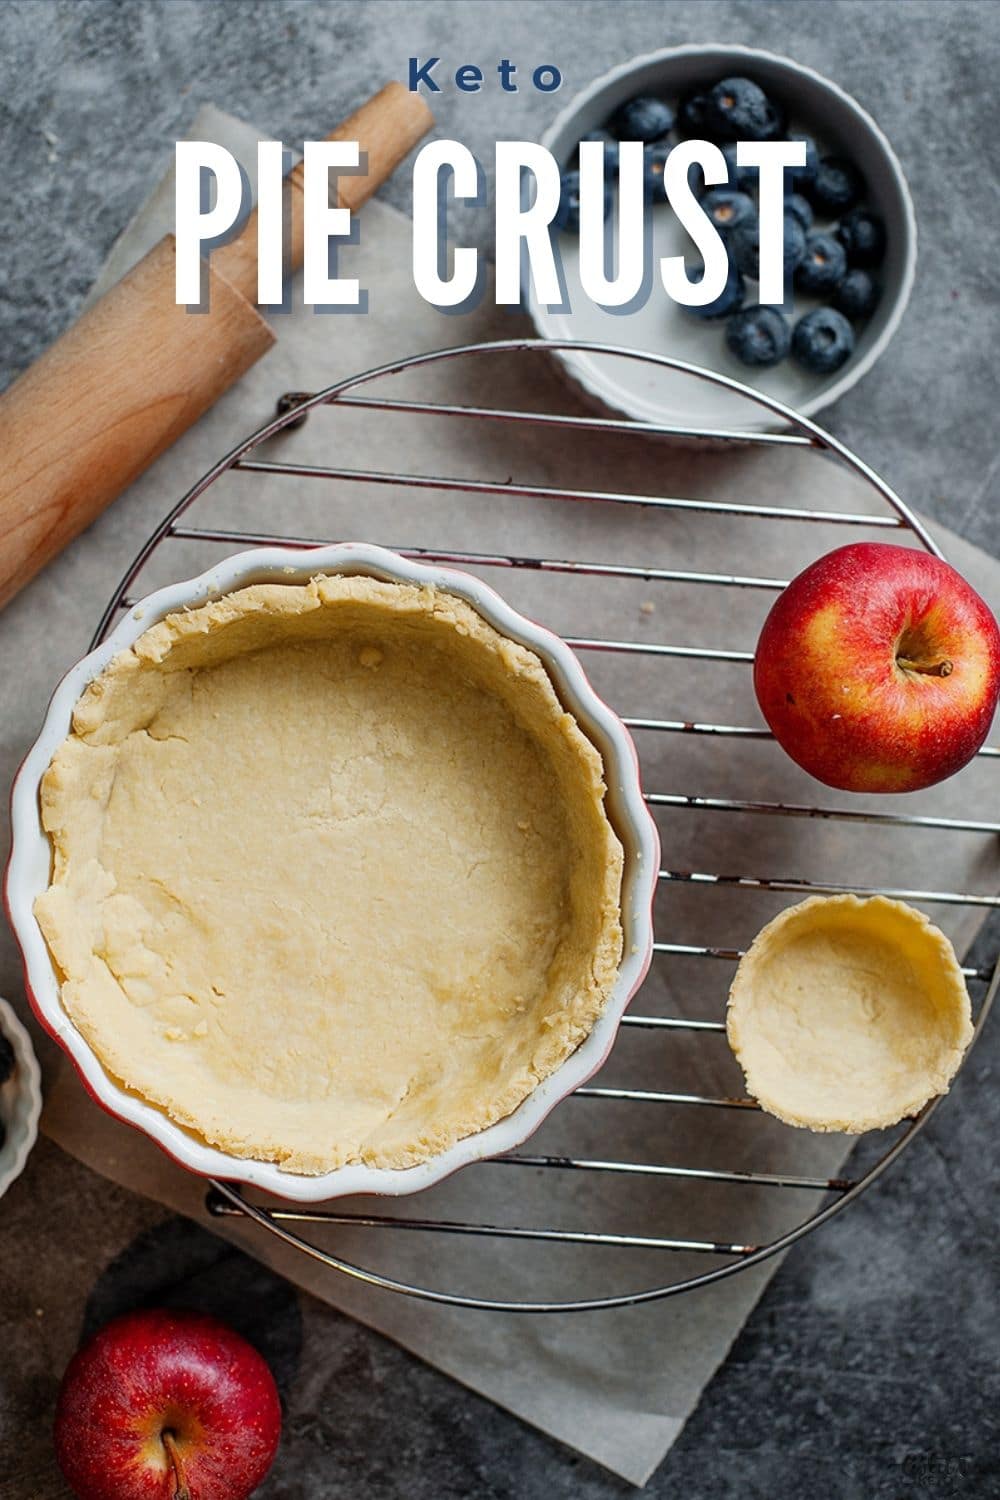 With only five ingredients you can make a crumbly, golden keto pie crust for your every sweet endeavor. Just let your imagination flow! #piecrust via @mysweetketo